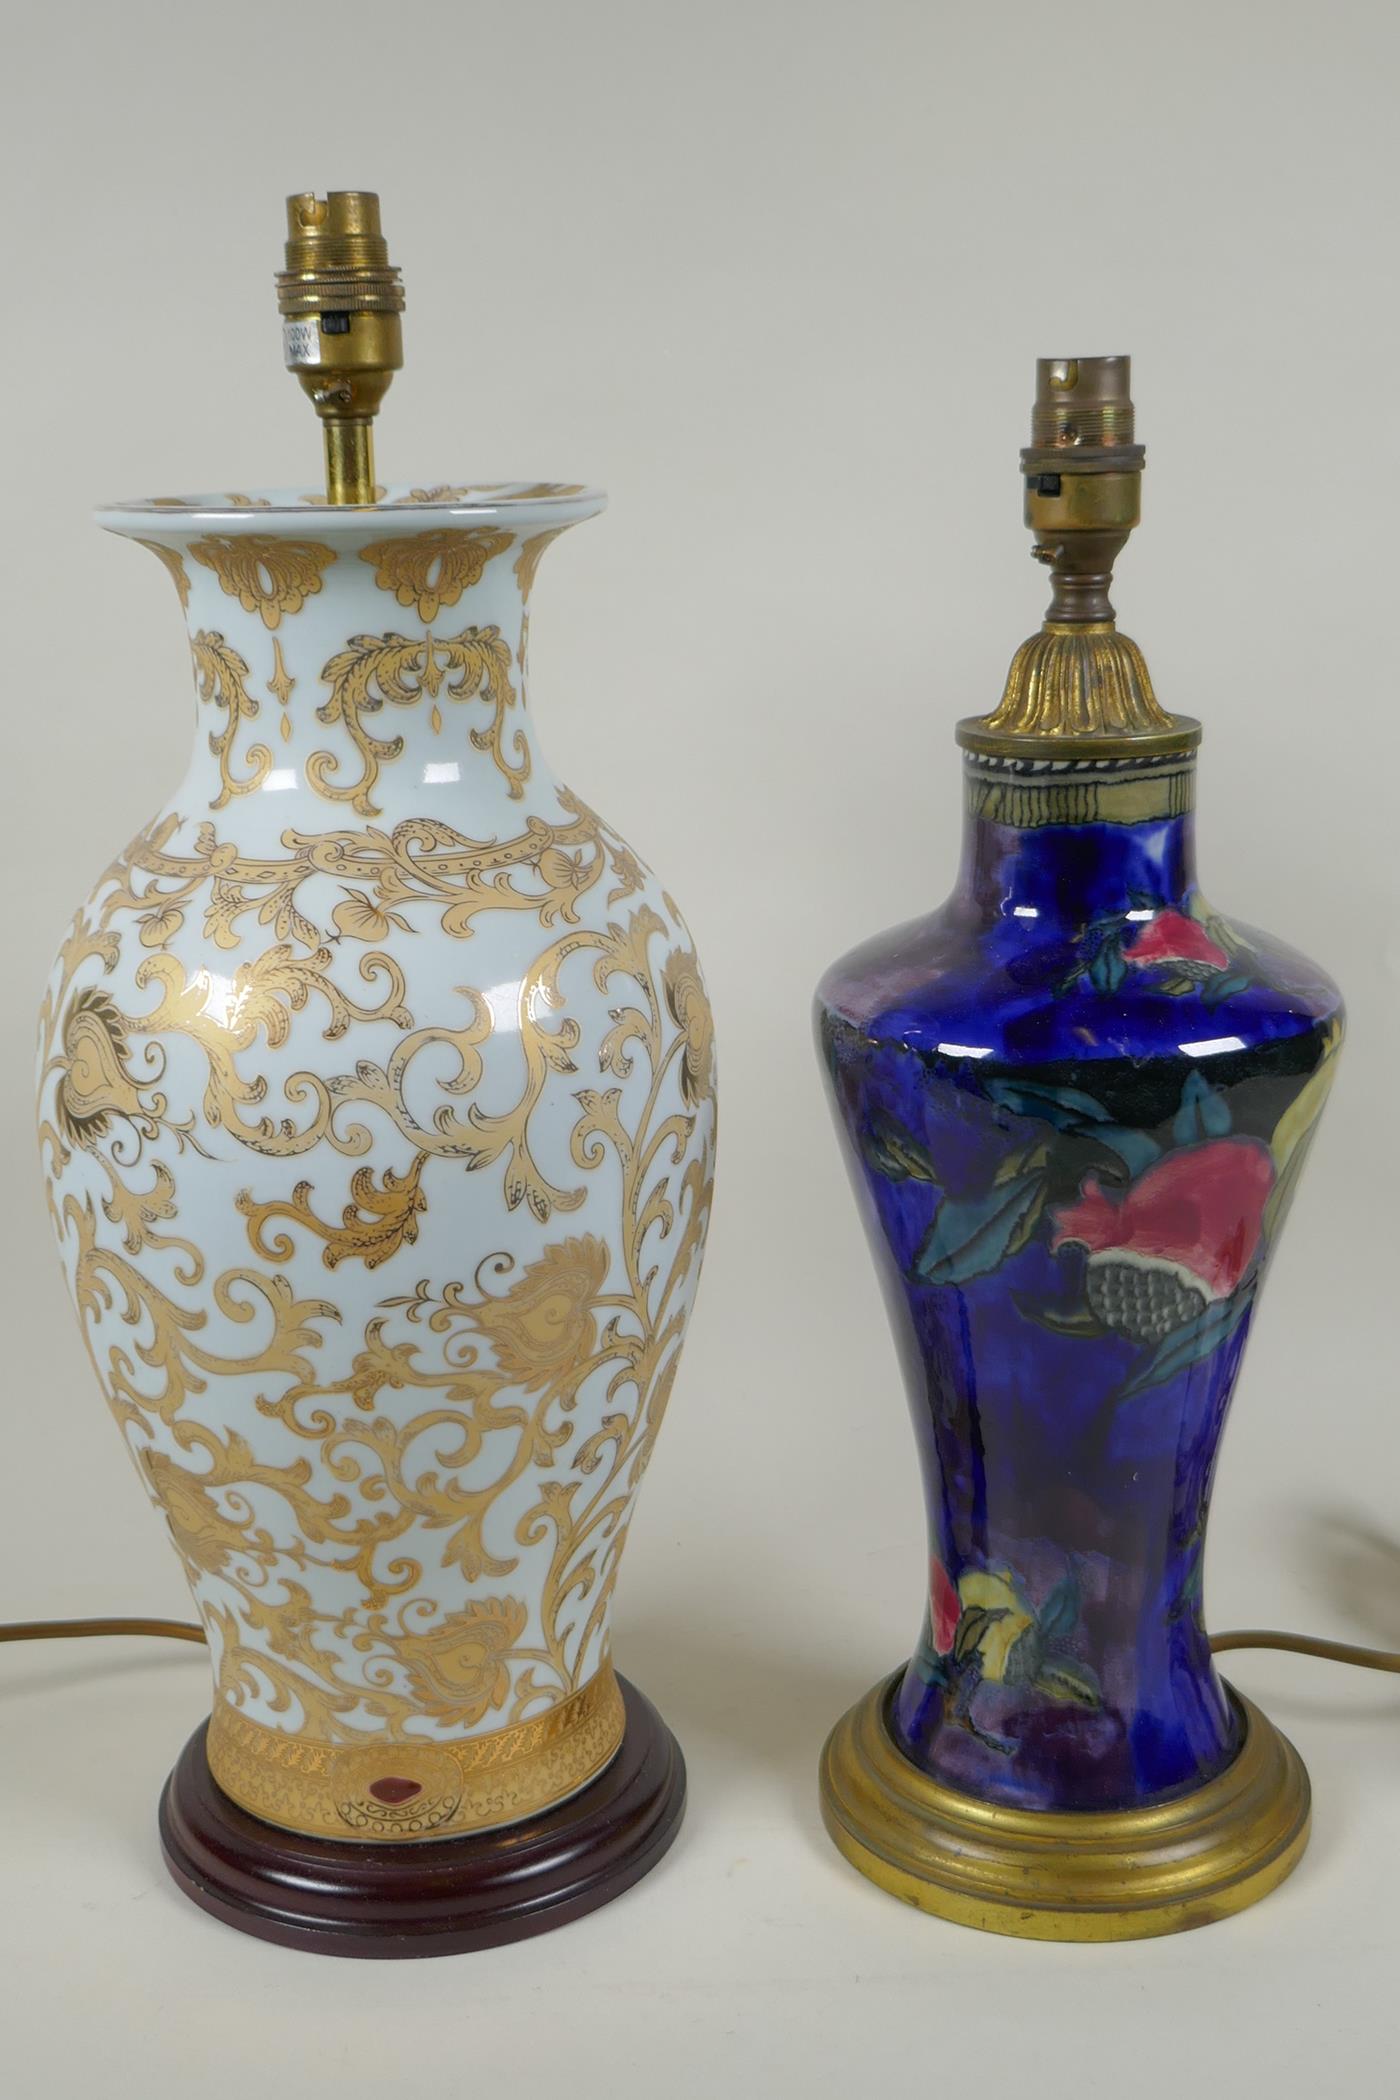 A Rubens ware pomegranate vase converted to a table lamp with brass mounts, together with a gilt